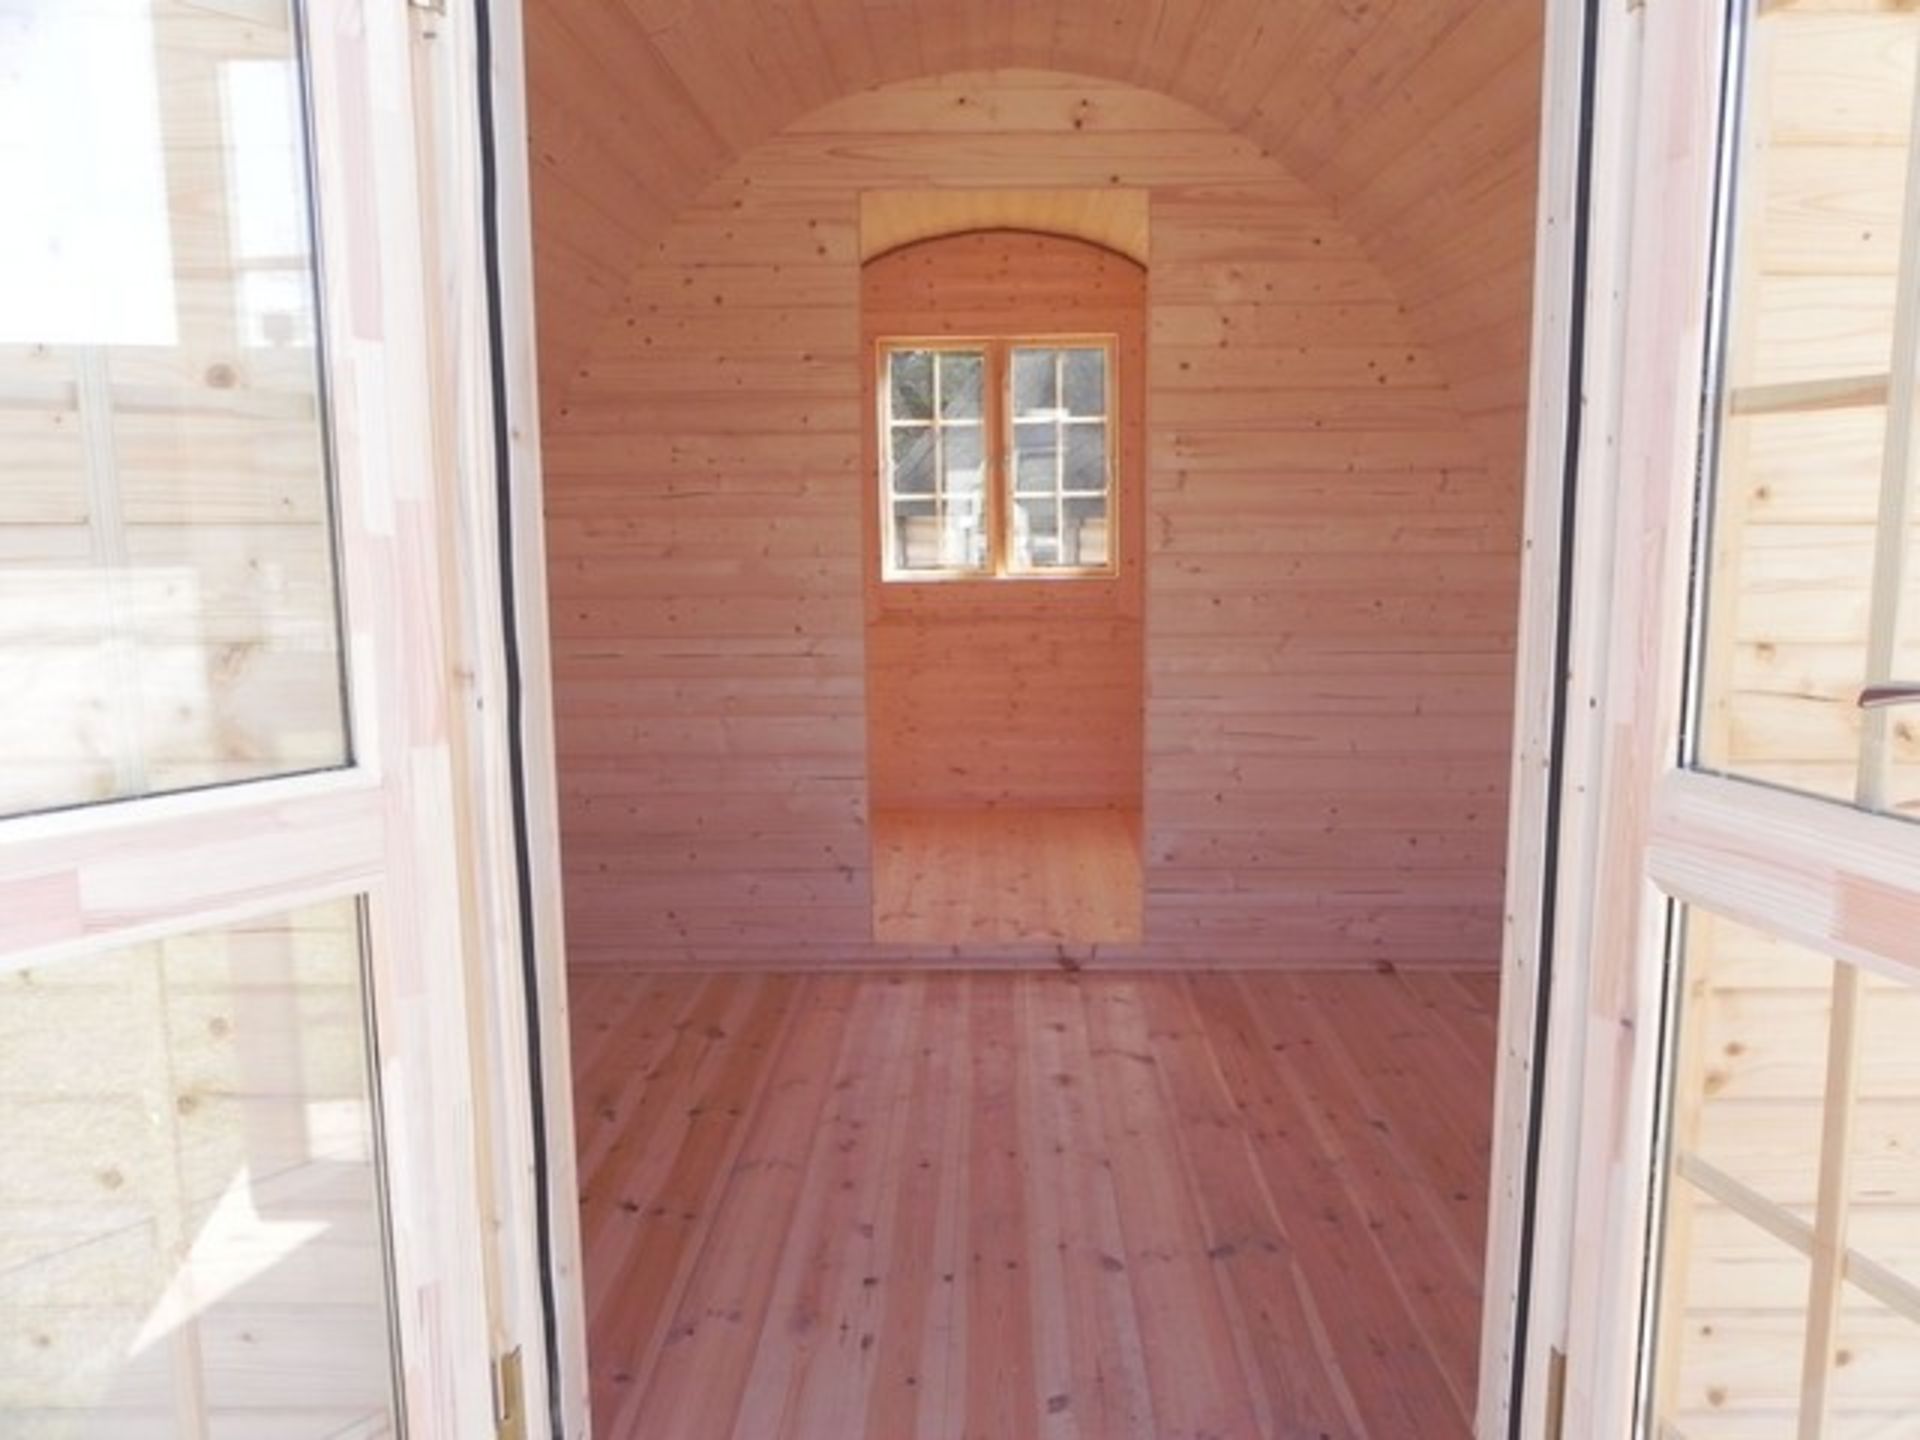 V Brand New Insulated 13.4m sq Spruce Camping Pod - Insulated Walls Floors and Panels - Two - Image 3 of 3